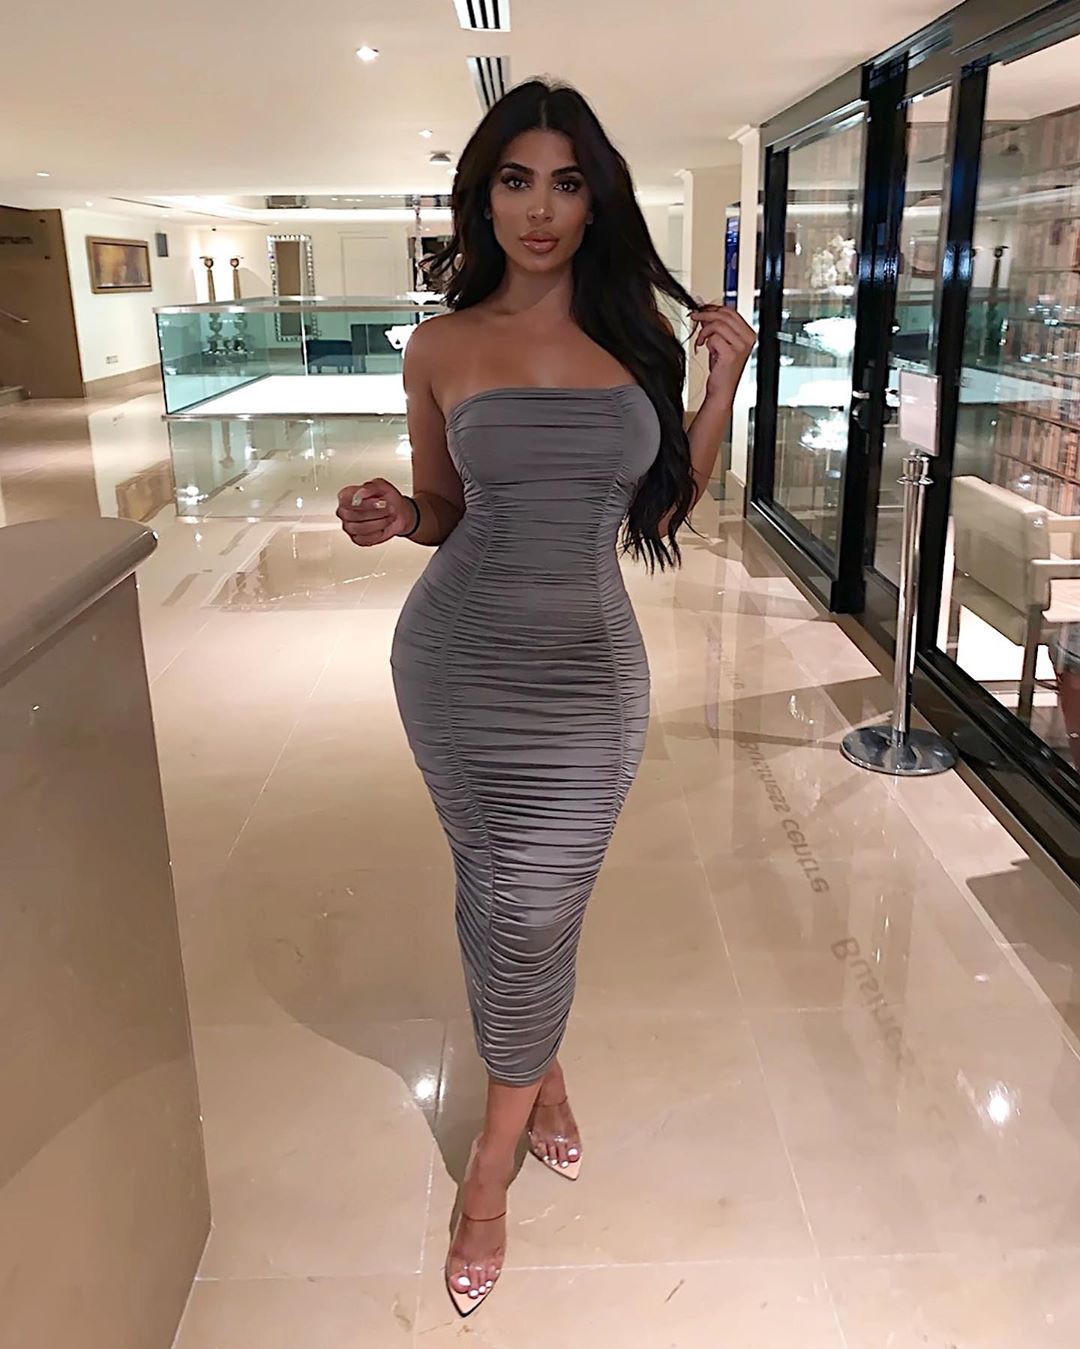 Cute & most liked fashion model, Link in Bio: Cocktail Dresses,  High-Heeled Shoe,  Street Style,  Casual Outfits,  College Party Outfits  